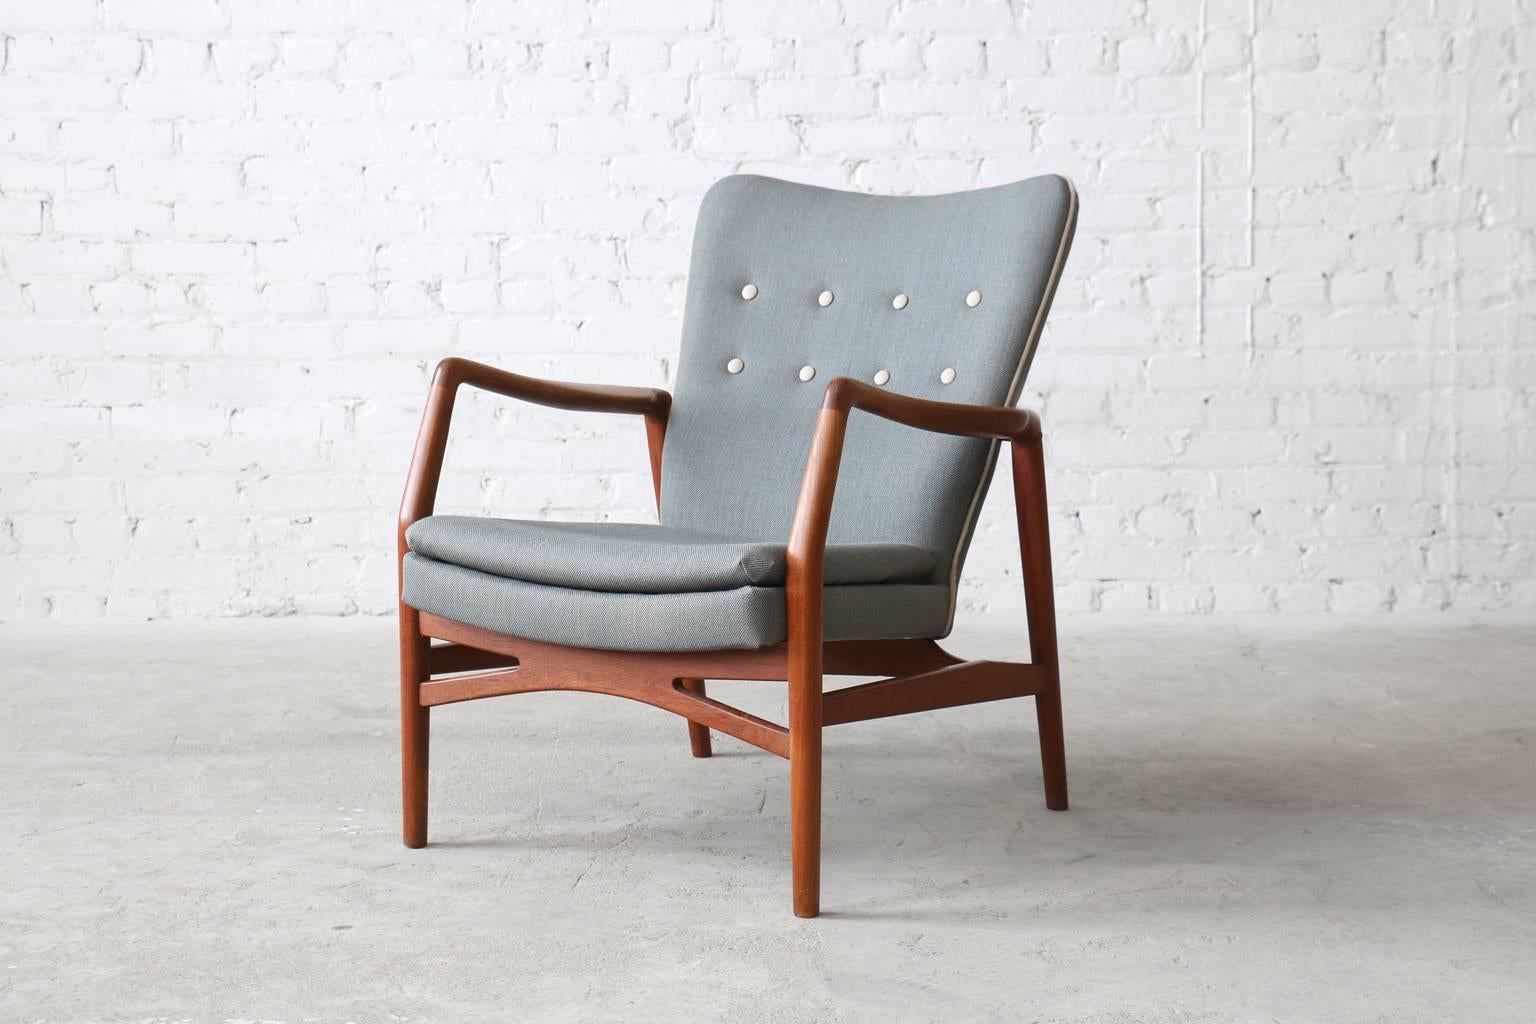 - model #215
- designed circa. 1955
- manufactured by Slagelse Møbelfabrik
- solid teak wood frame
- new pale blue Kvadrat Steelcut wool upholstery with contrasting sand coloured piping and buttons

A teak easy chair by Kurt Olsen for Slagelse